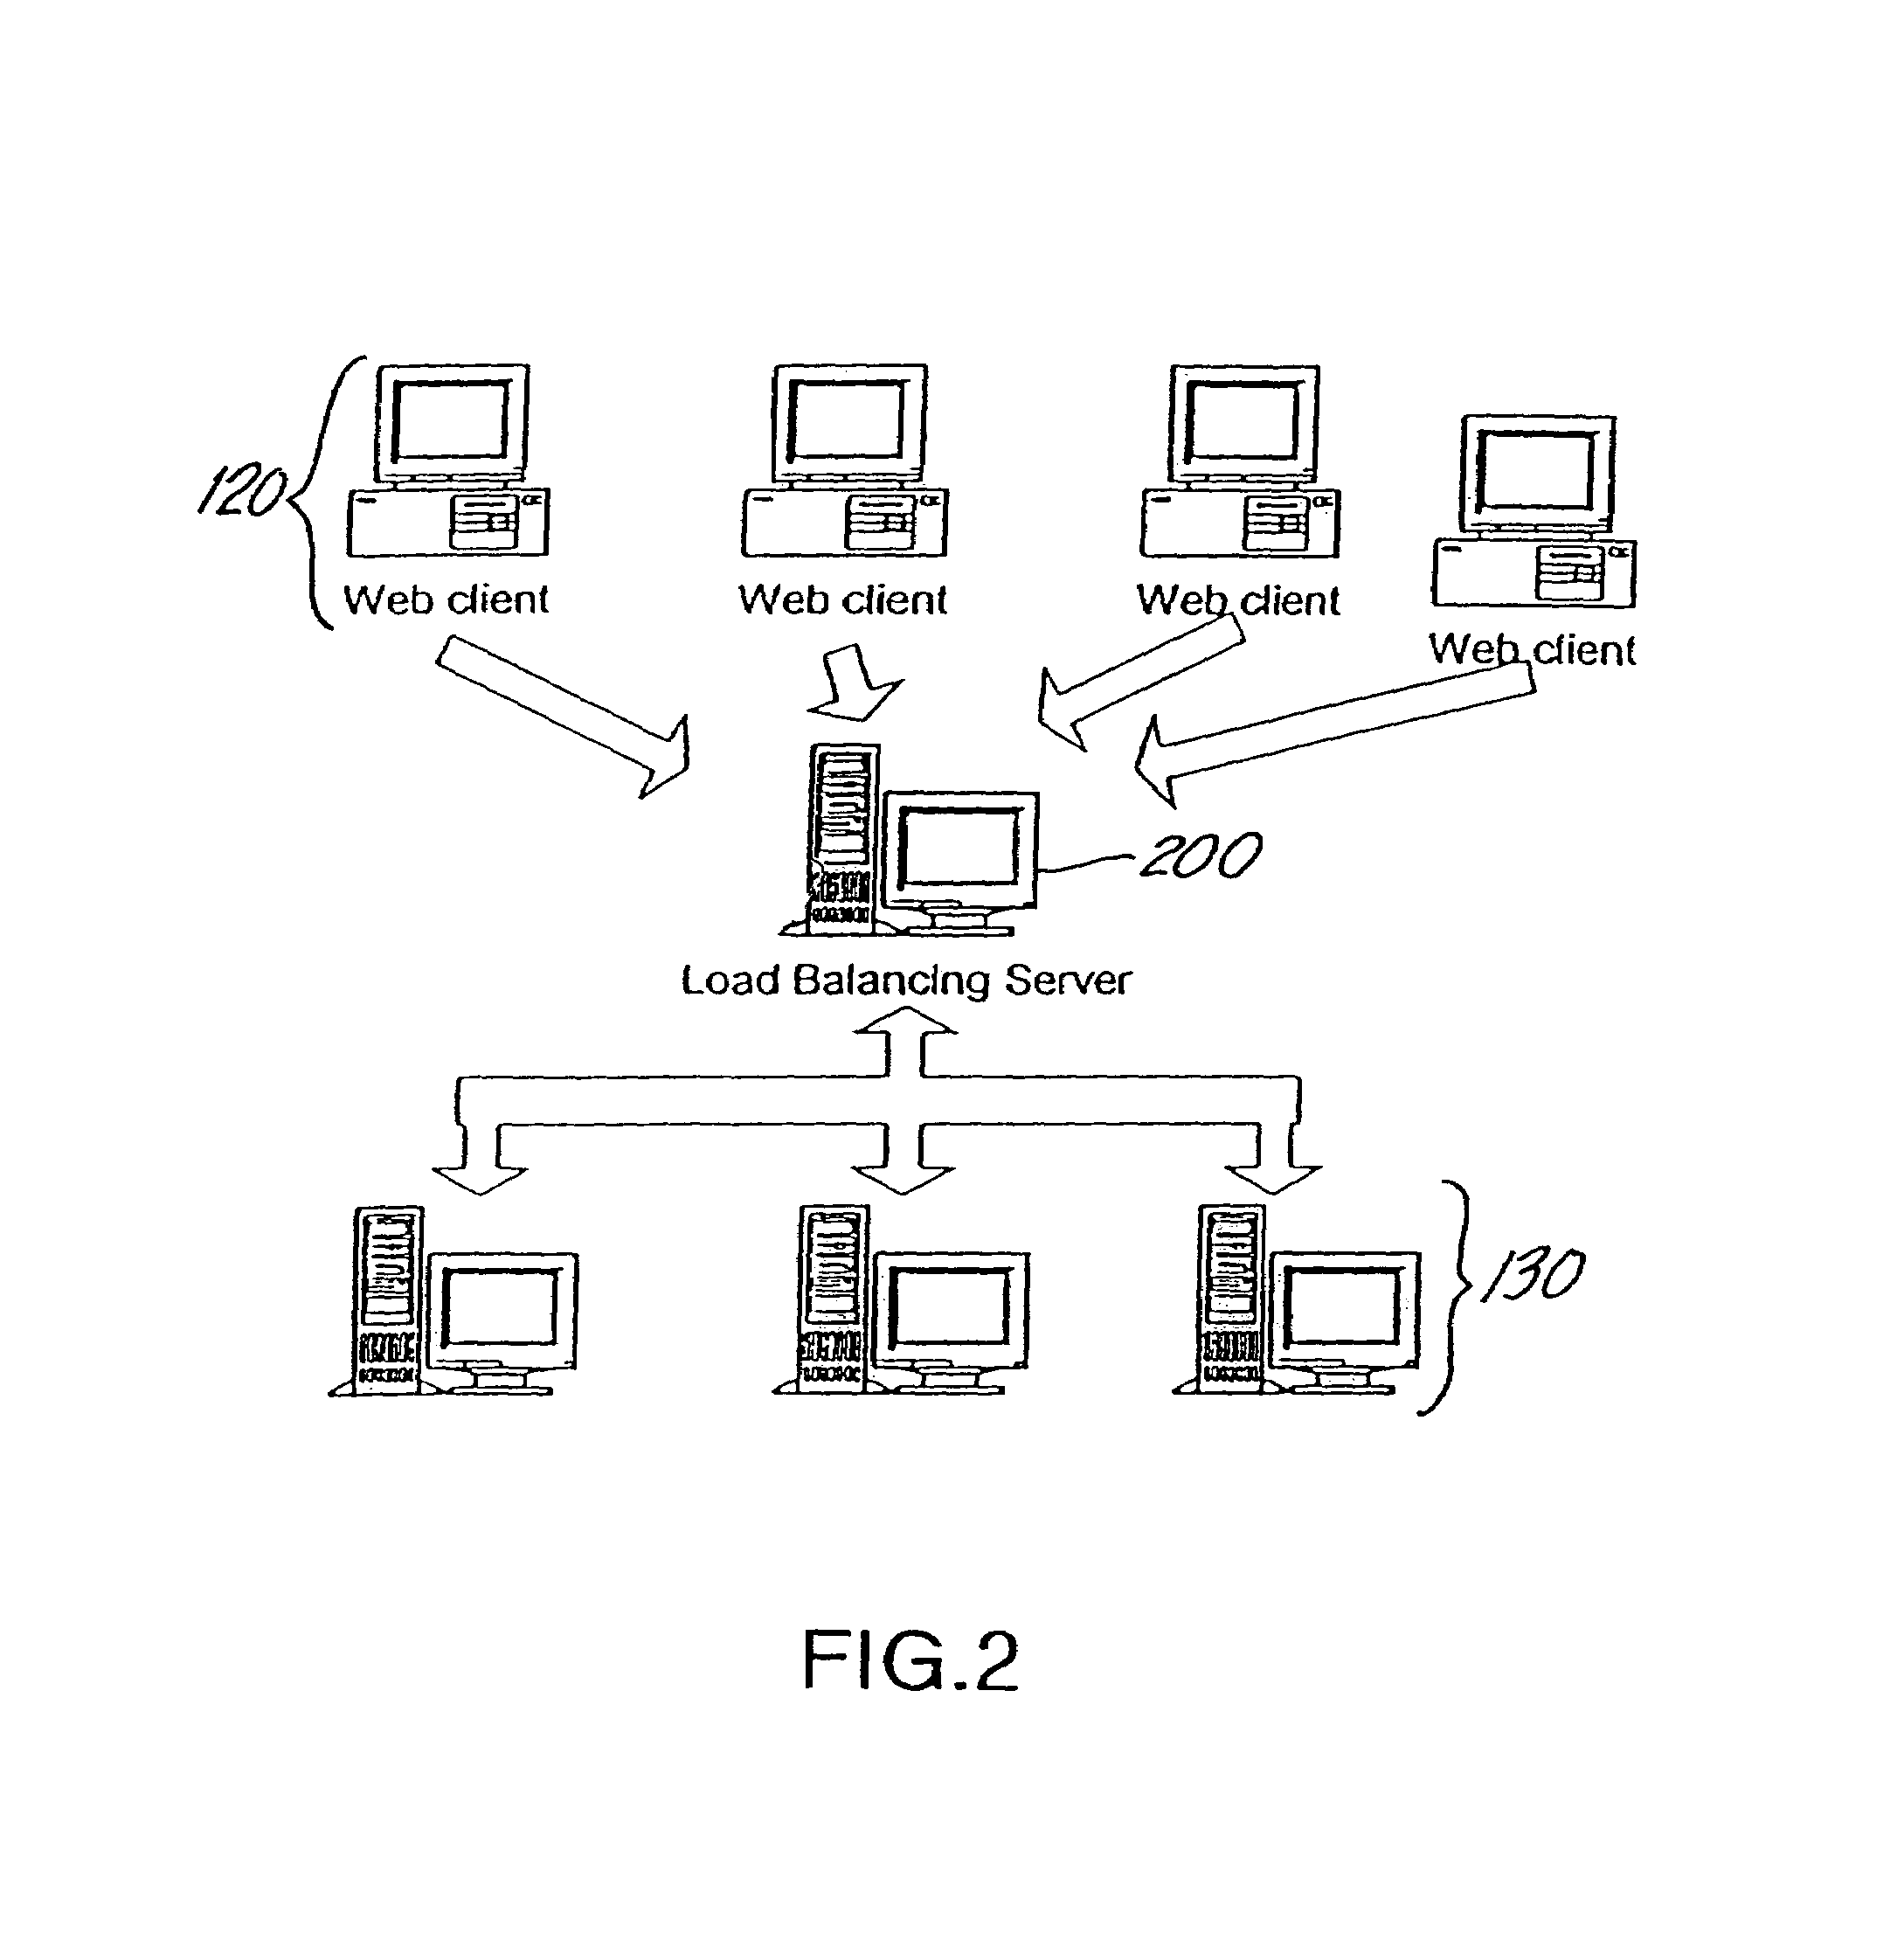 Internet-based education support system and methods